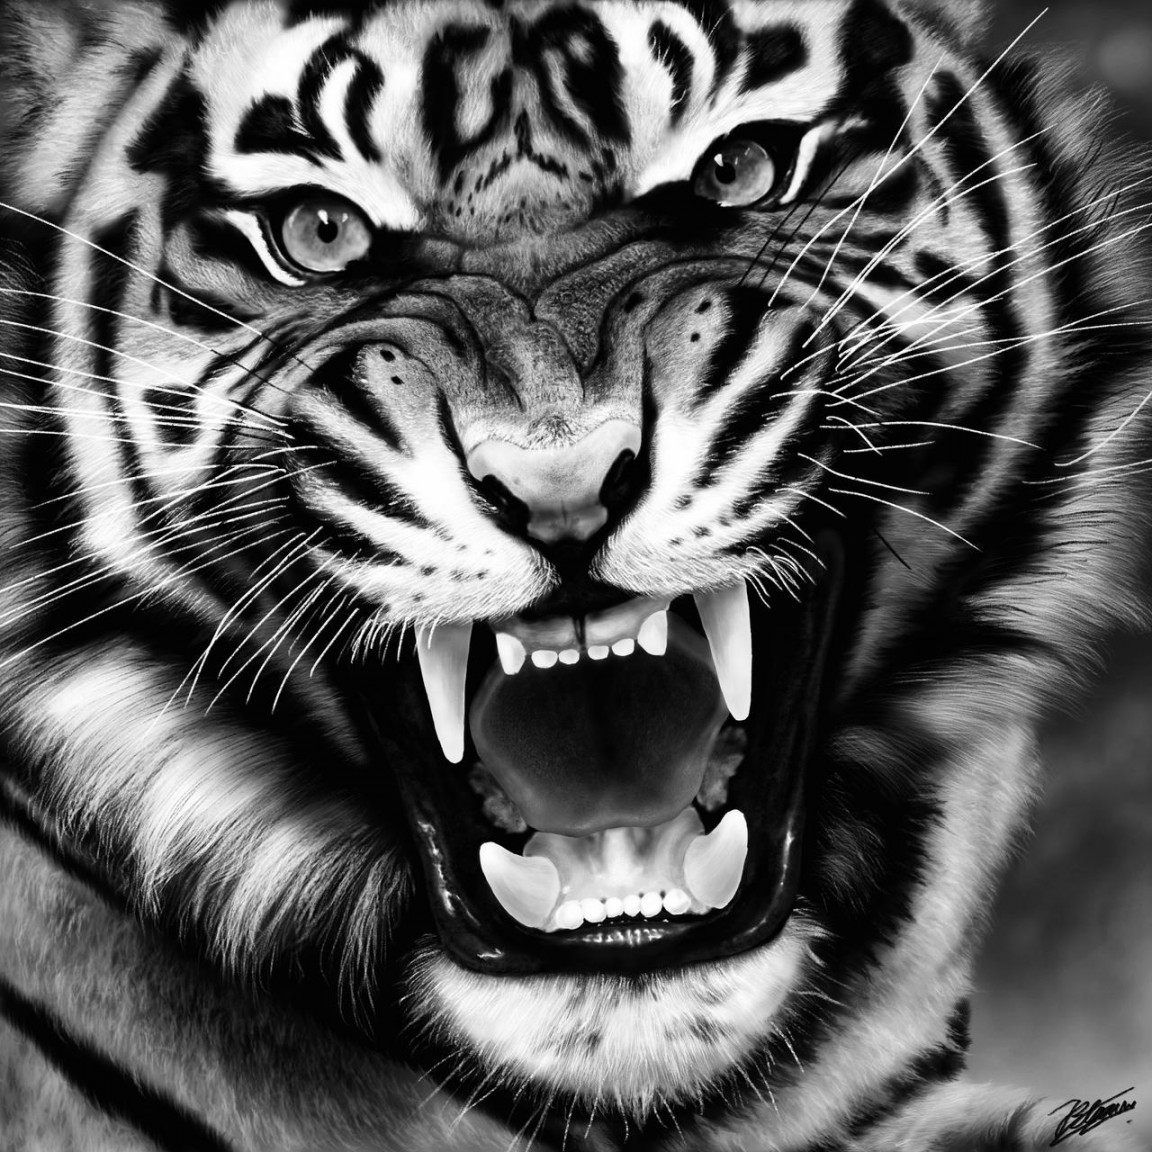 Tiger drawing black and white version by JelleBlue on DeviantArt